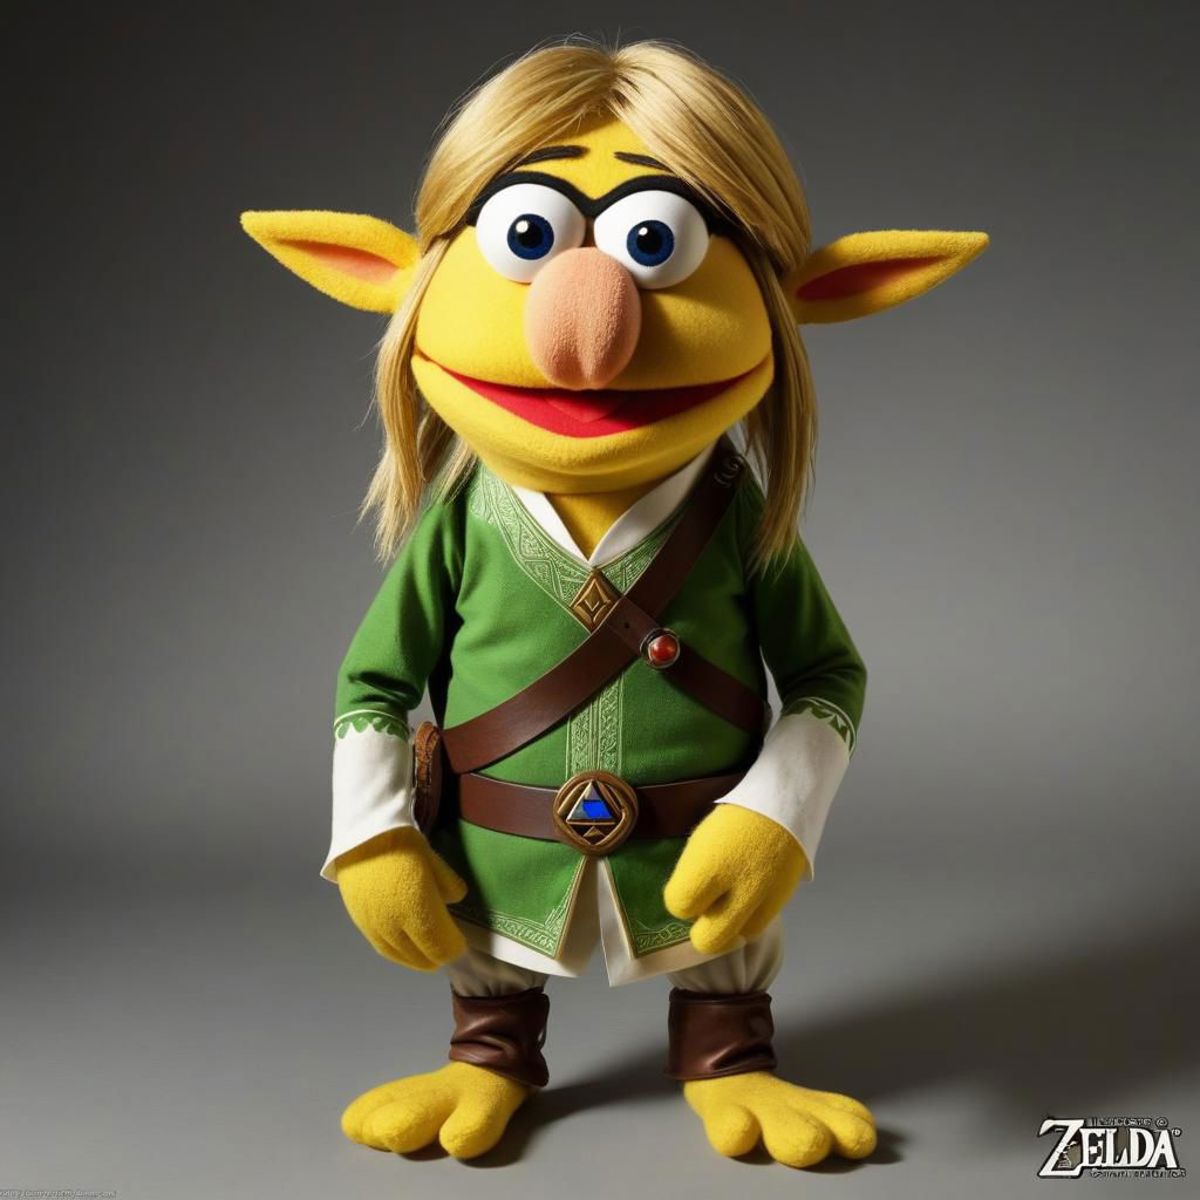 A Muppet dressed as Link from The Legend of Zelda.